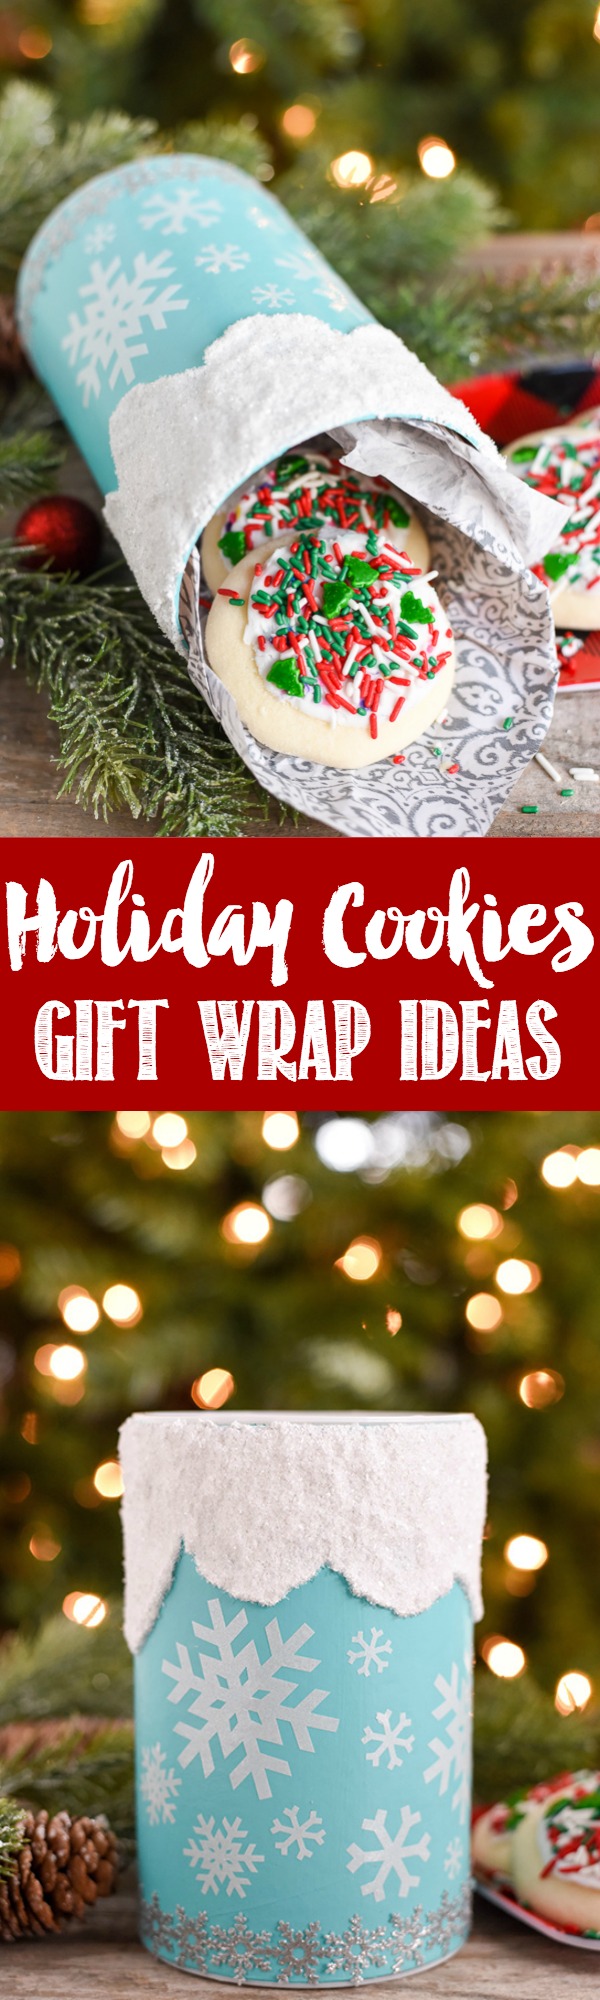 Holiday Cookies Gift Wrap Ideas